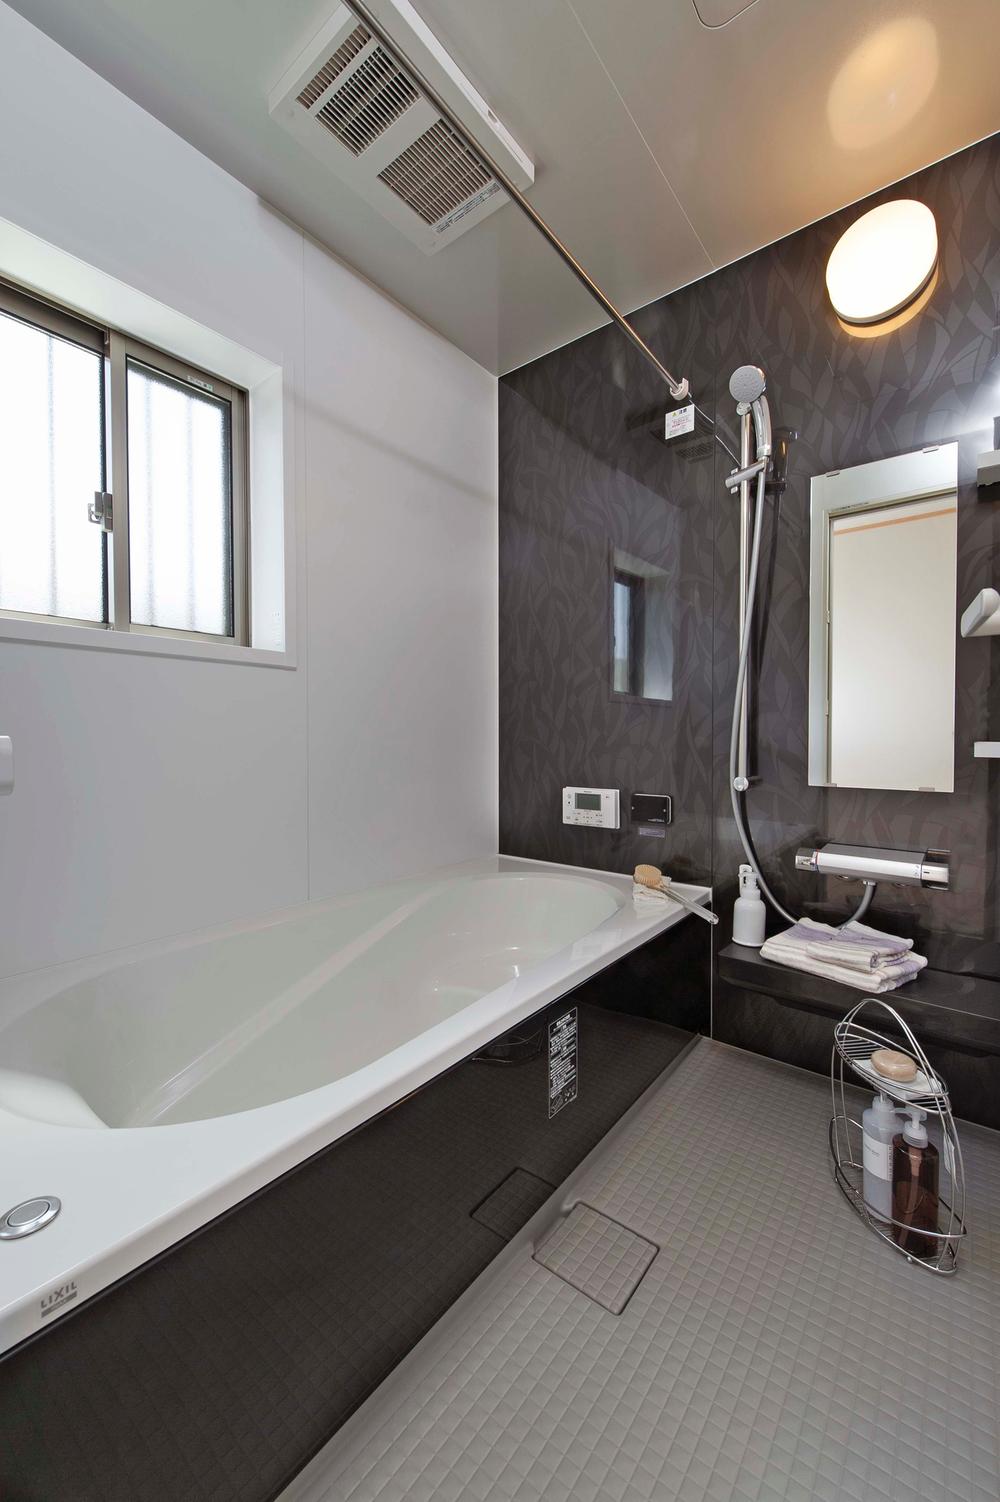 Model house photo. Microbubble bus standard equipment. Can experience the bubble bath and beauty bus while in the house. 